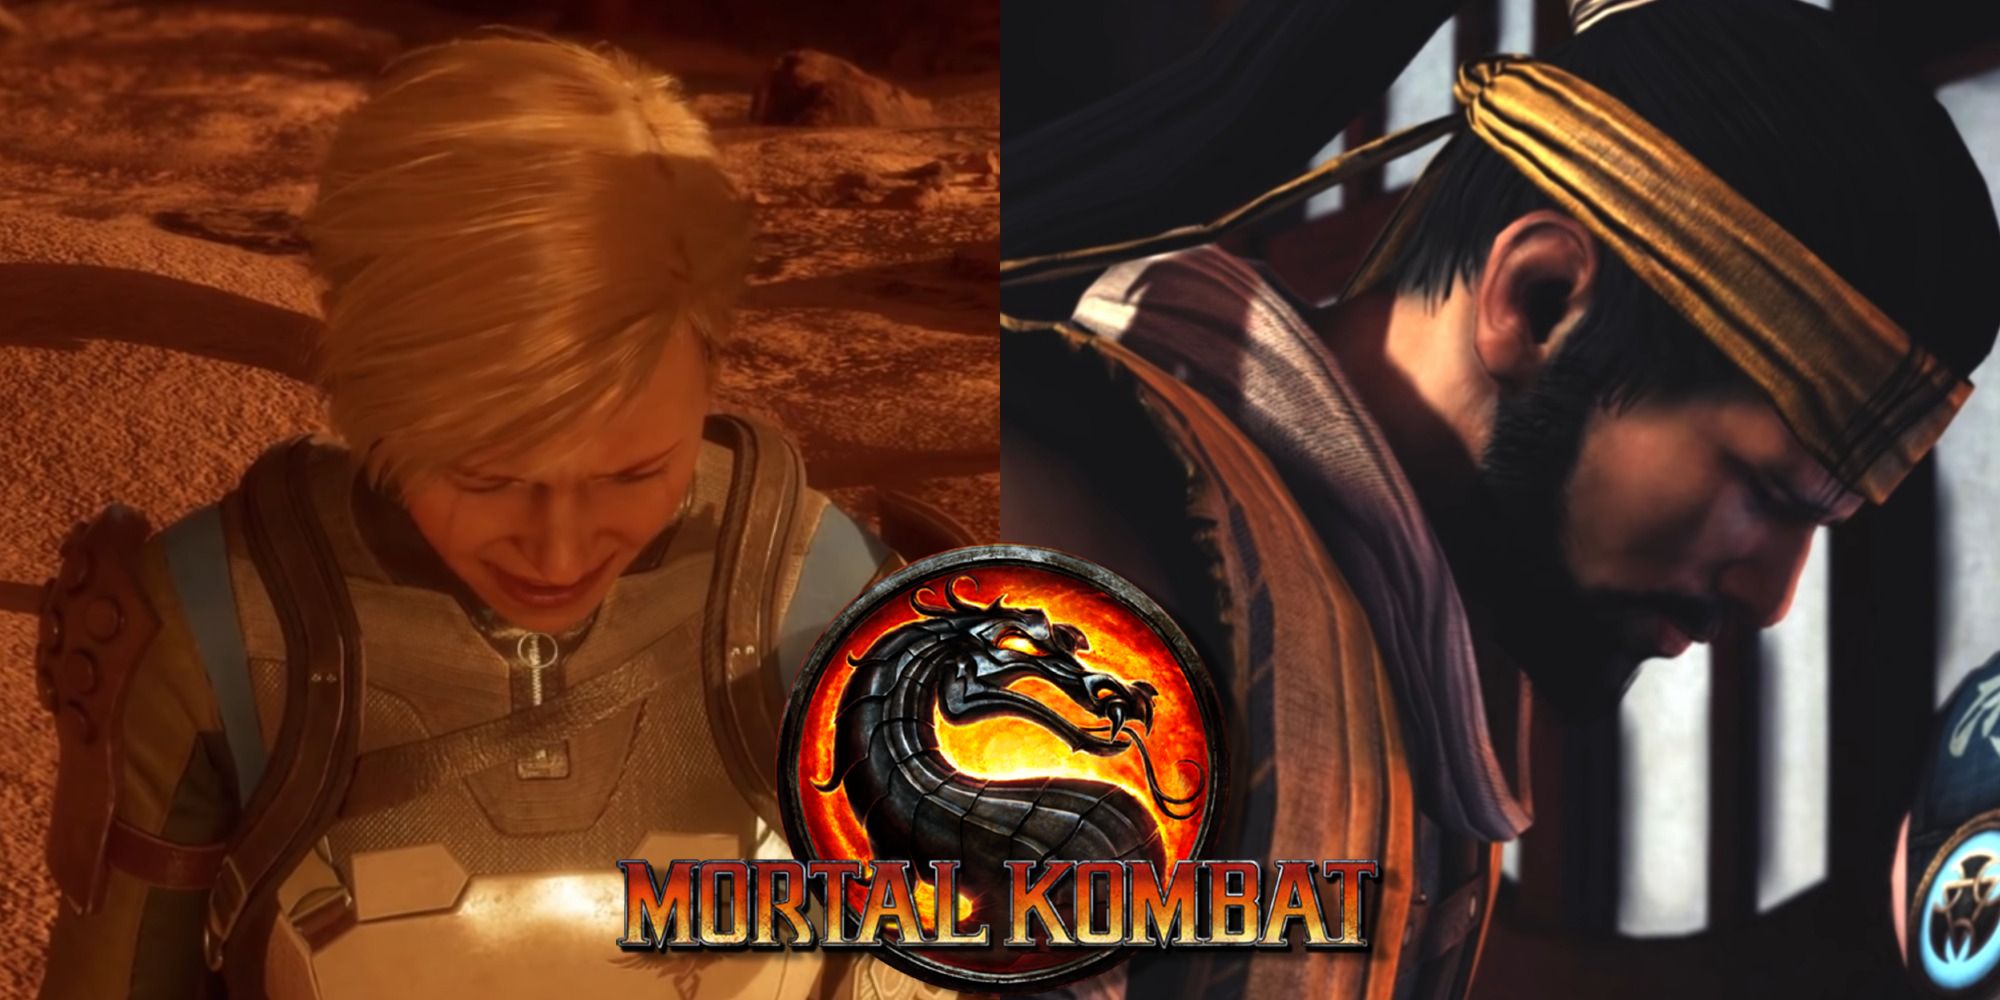 Split image of Cassie Cage crying in Mortal Kombat 11 and Scorpion in Mortal Kombat X